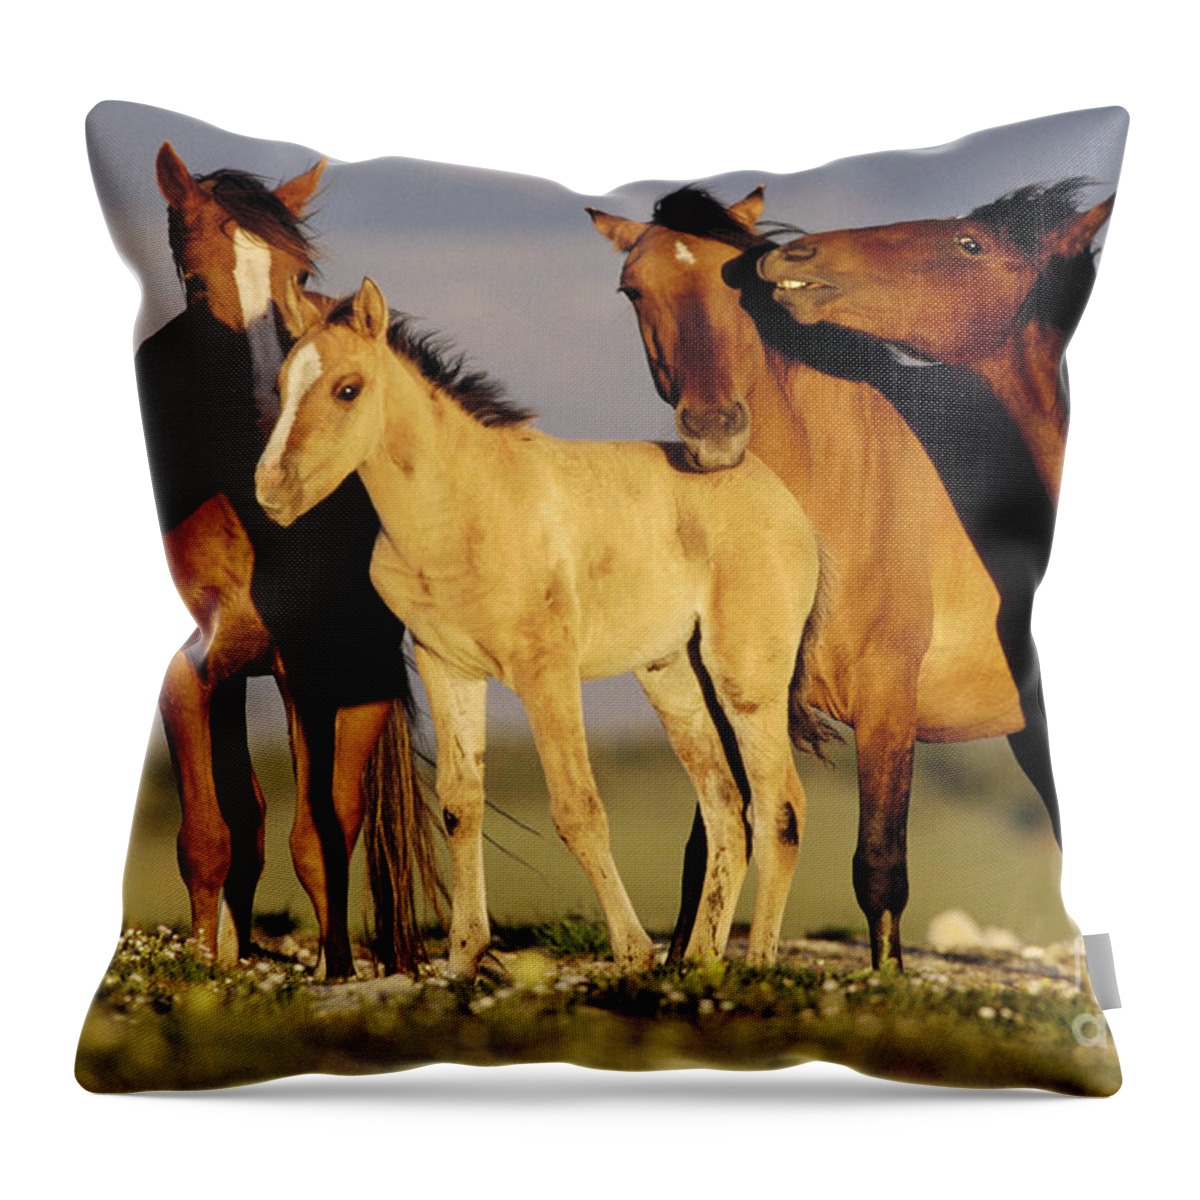 00340031 Throw Pillow featuring the photograph Mustang Family Band Montana by Yva Momatiuk John Eastcott